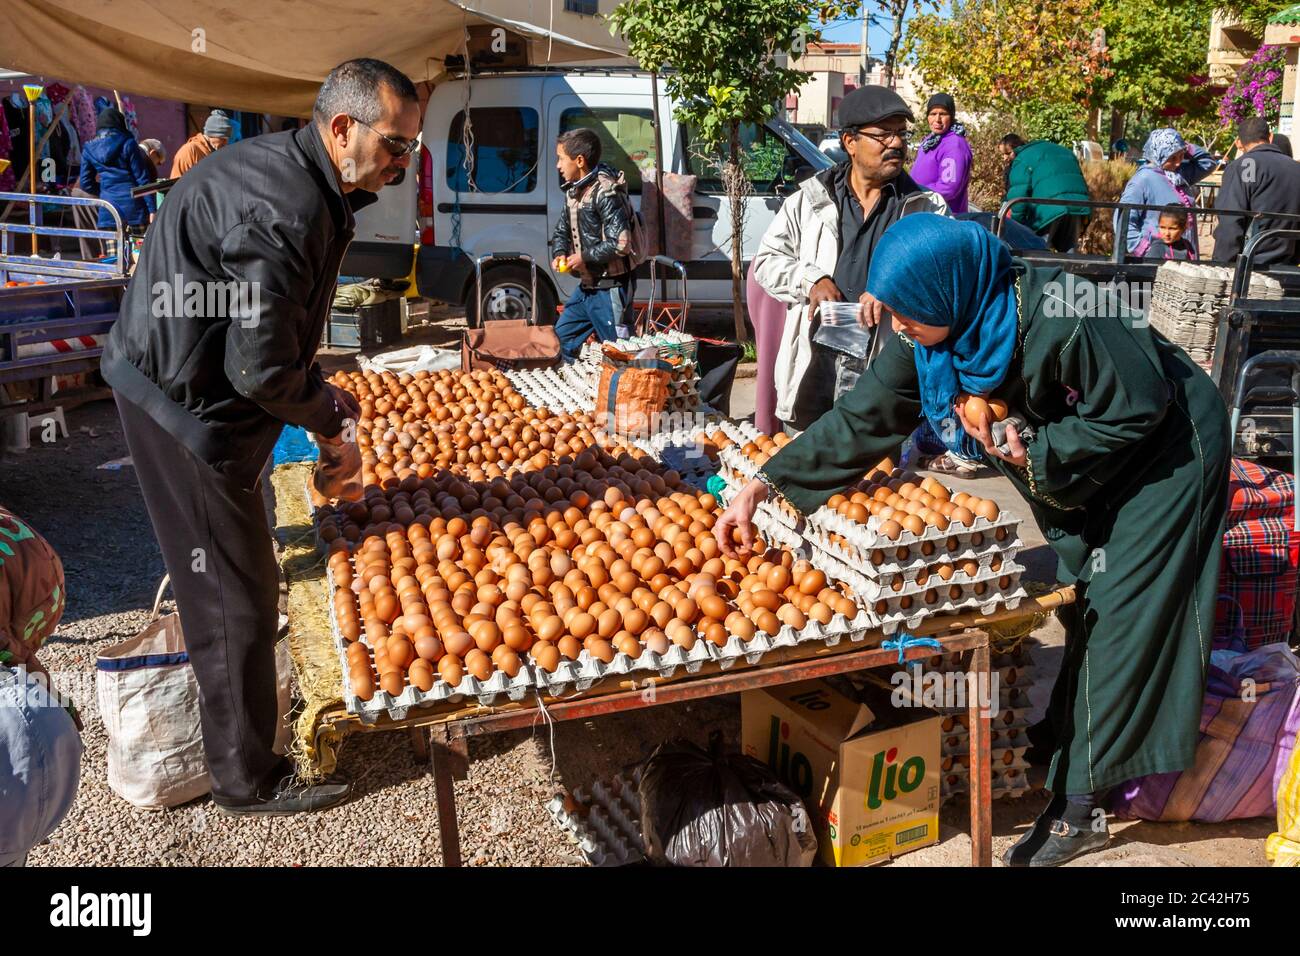 Impressions of Morocco: Eggs in the vegetable market Stock Photo